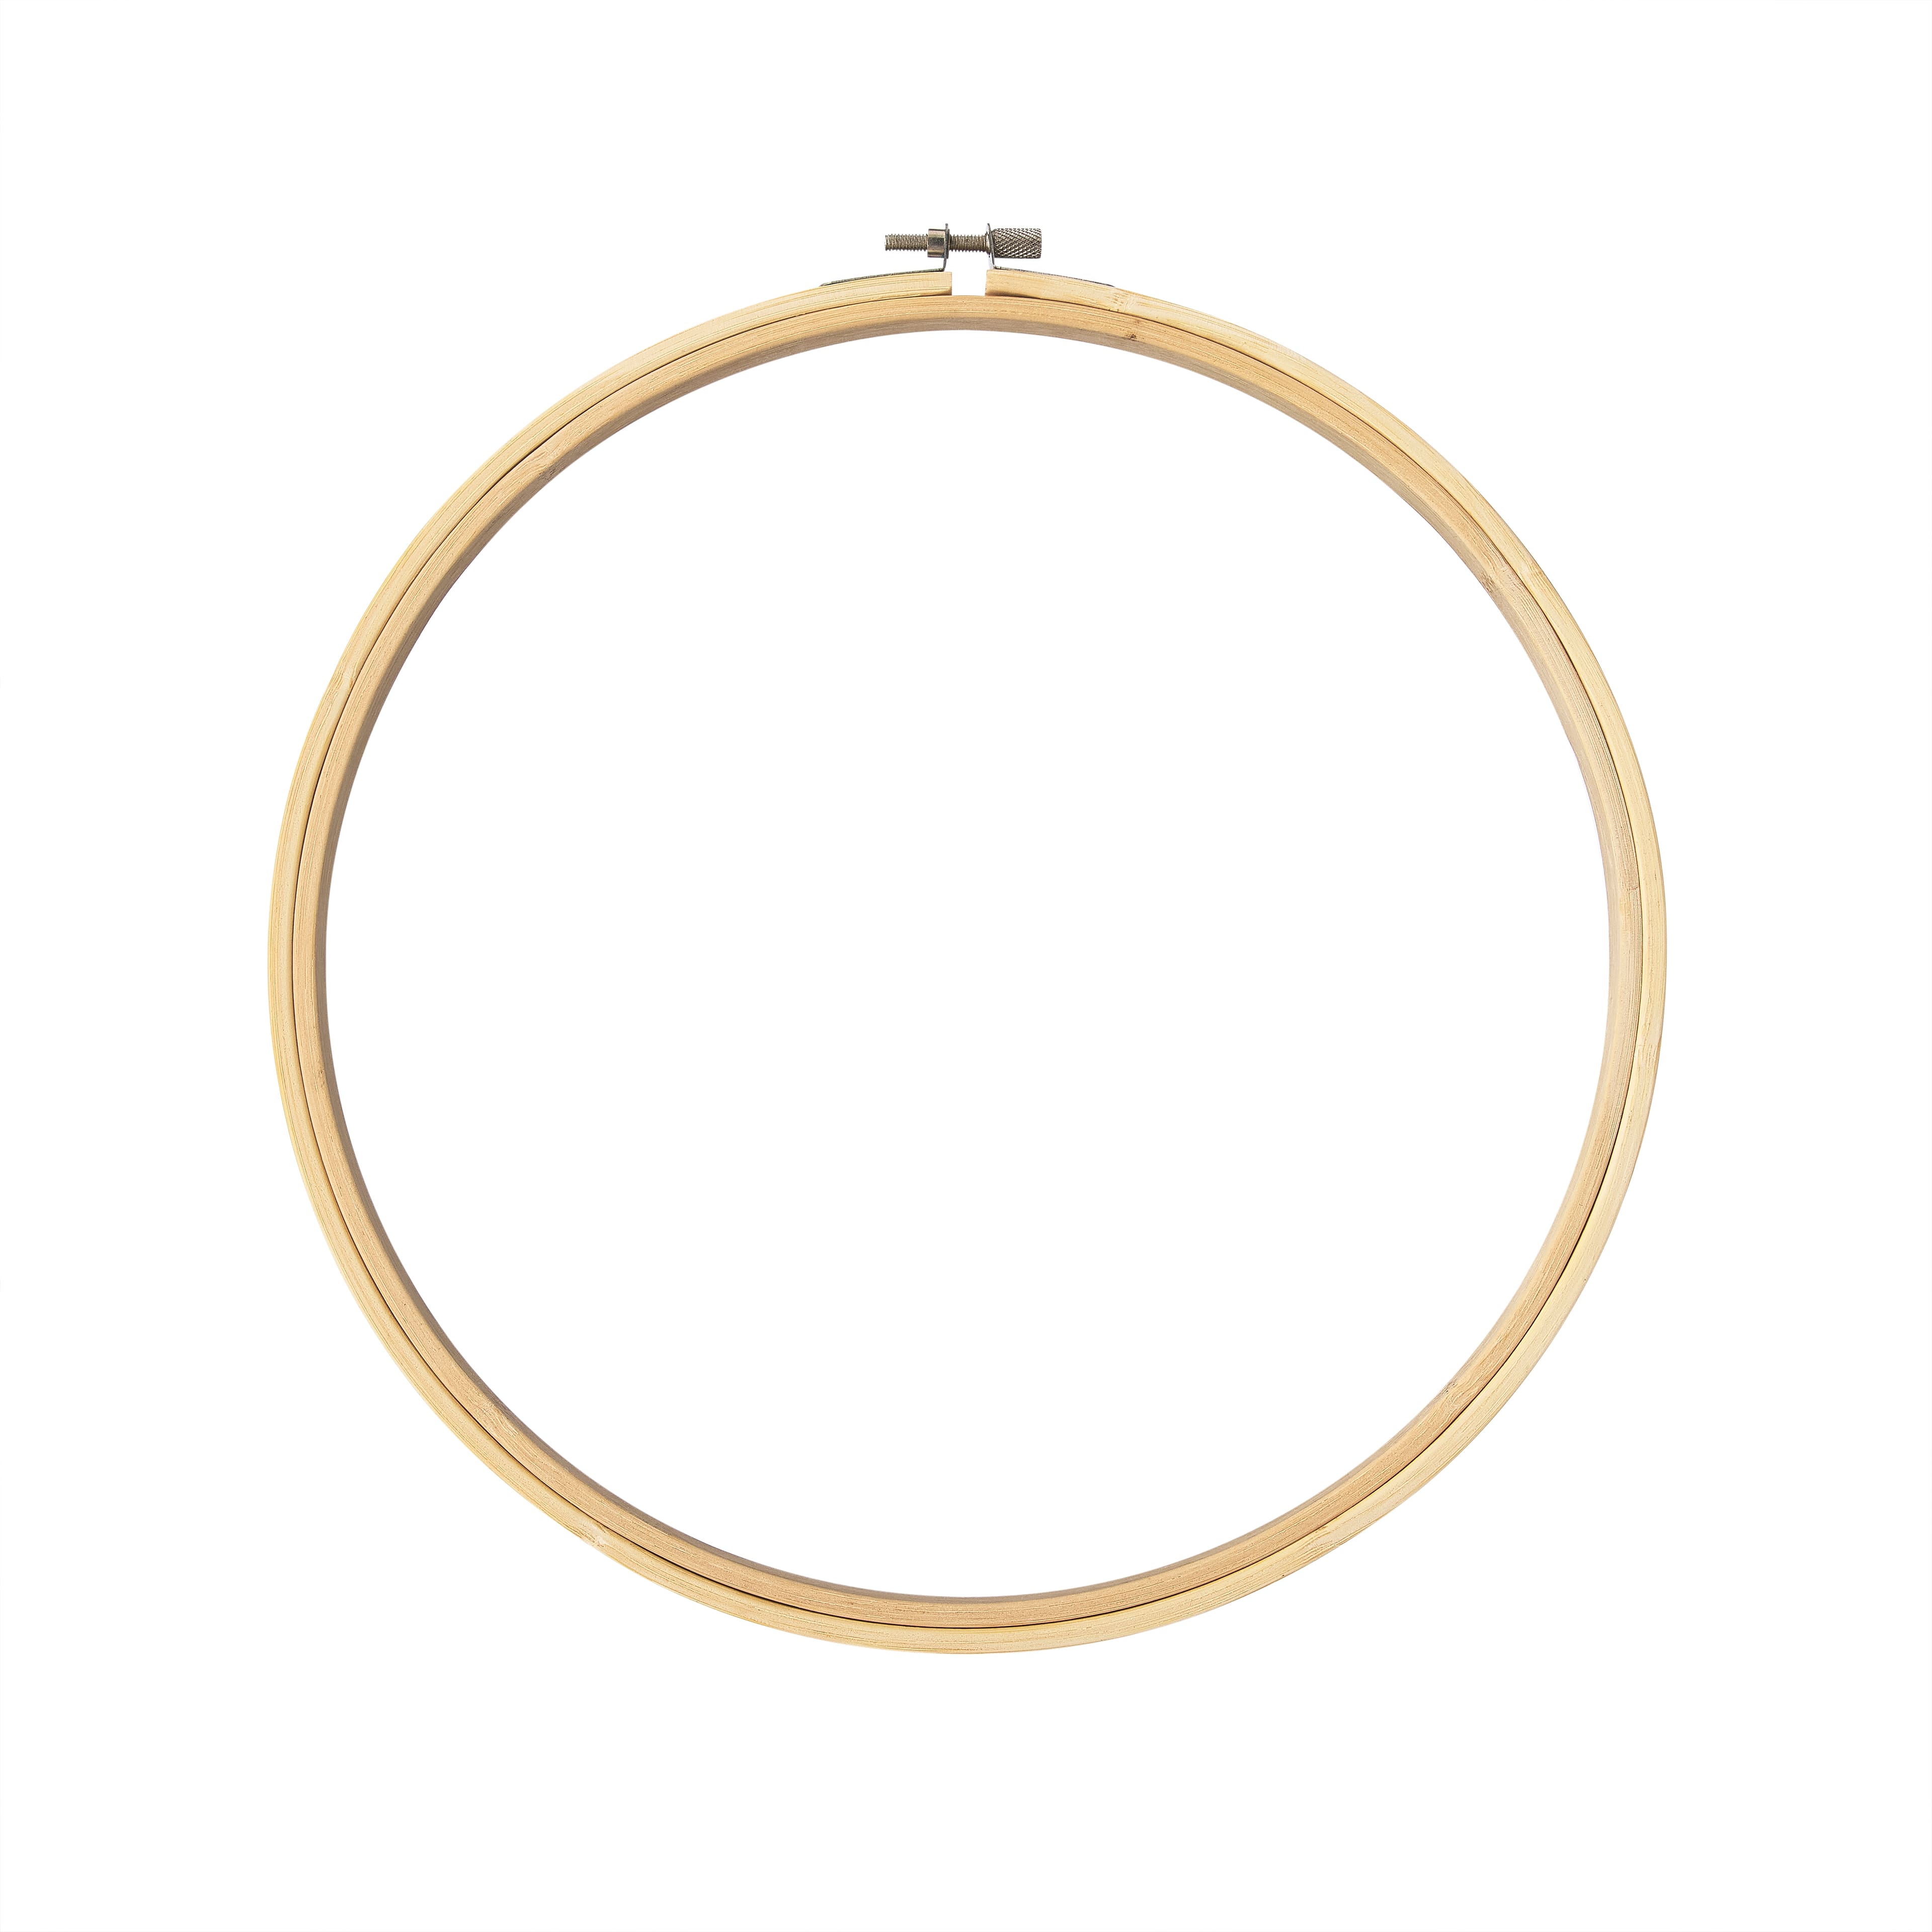 4 Pieces Wooden Embroidery Hoop Ring Frame: Size - 6, 8, 10, and 12  Inch-Adjust